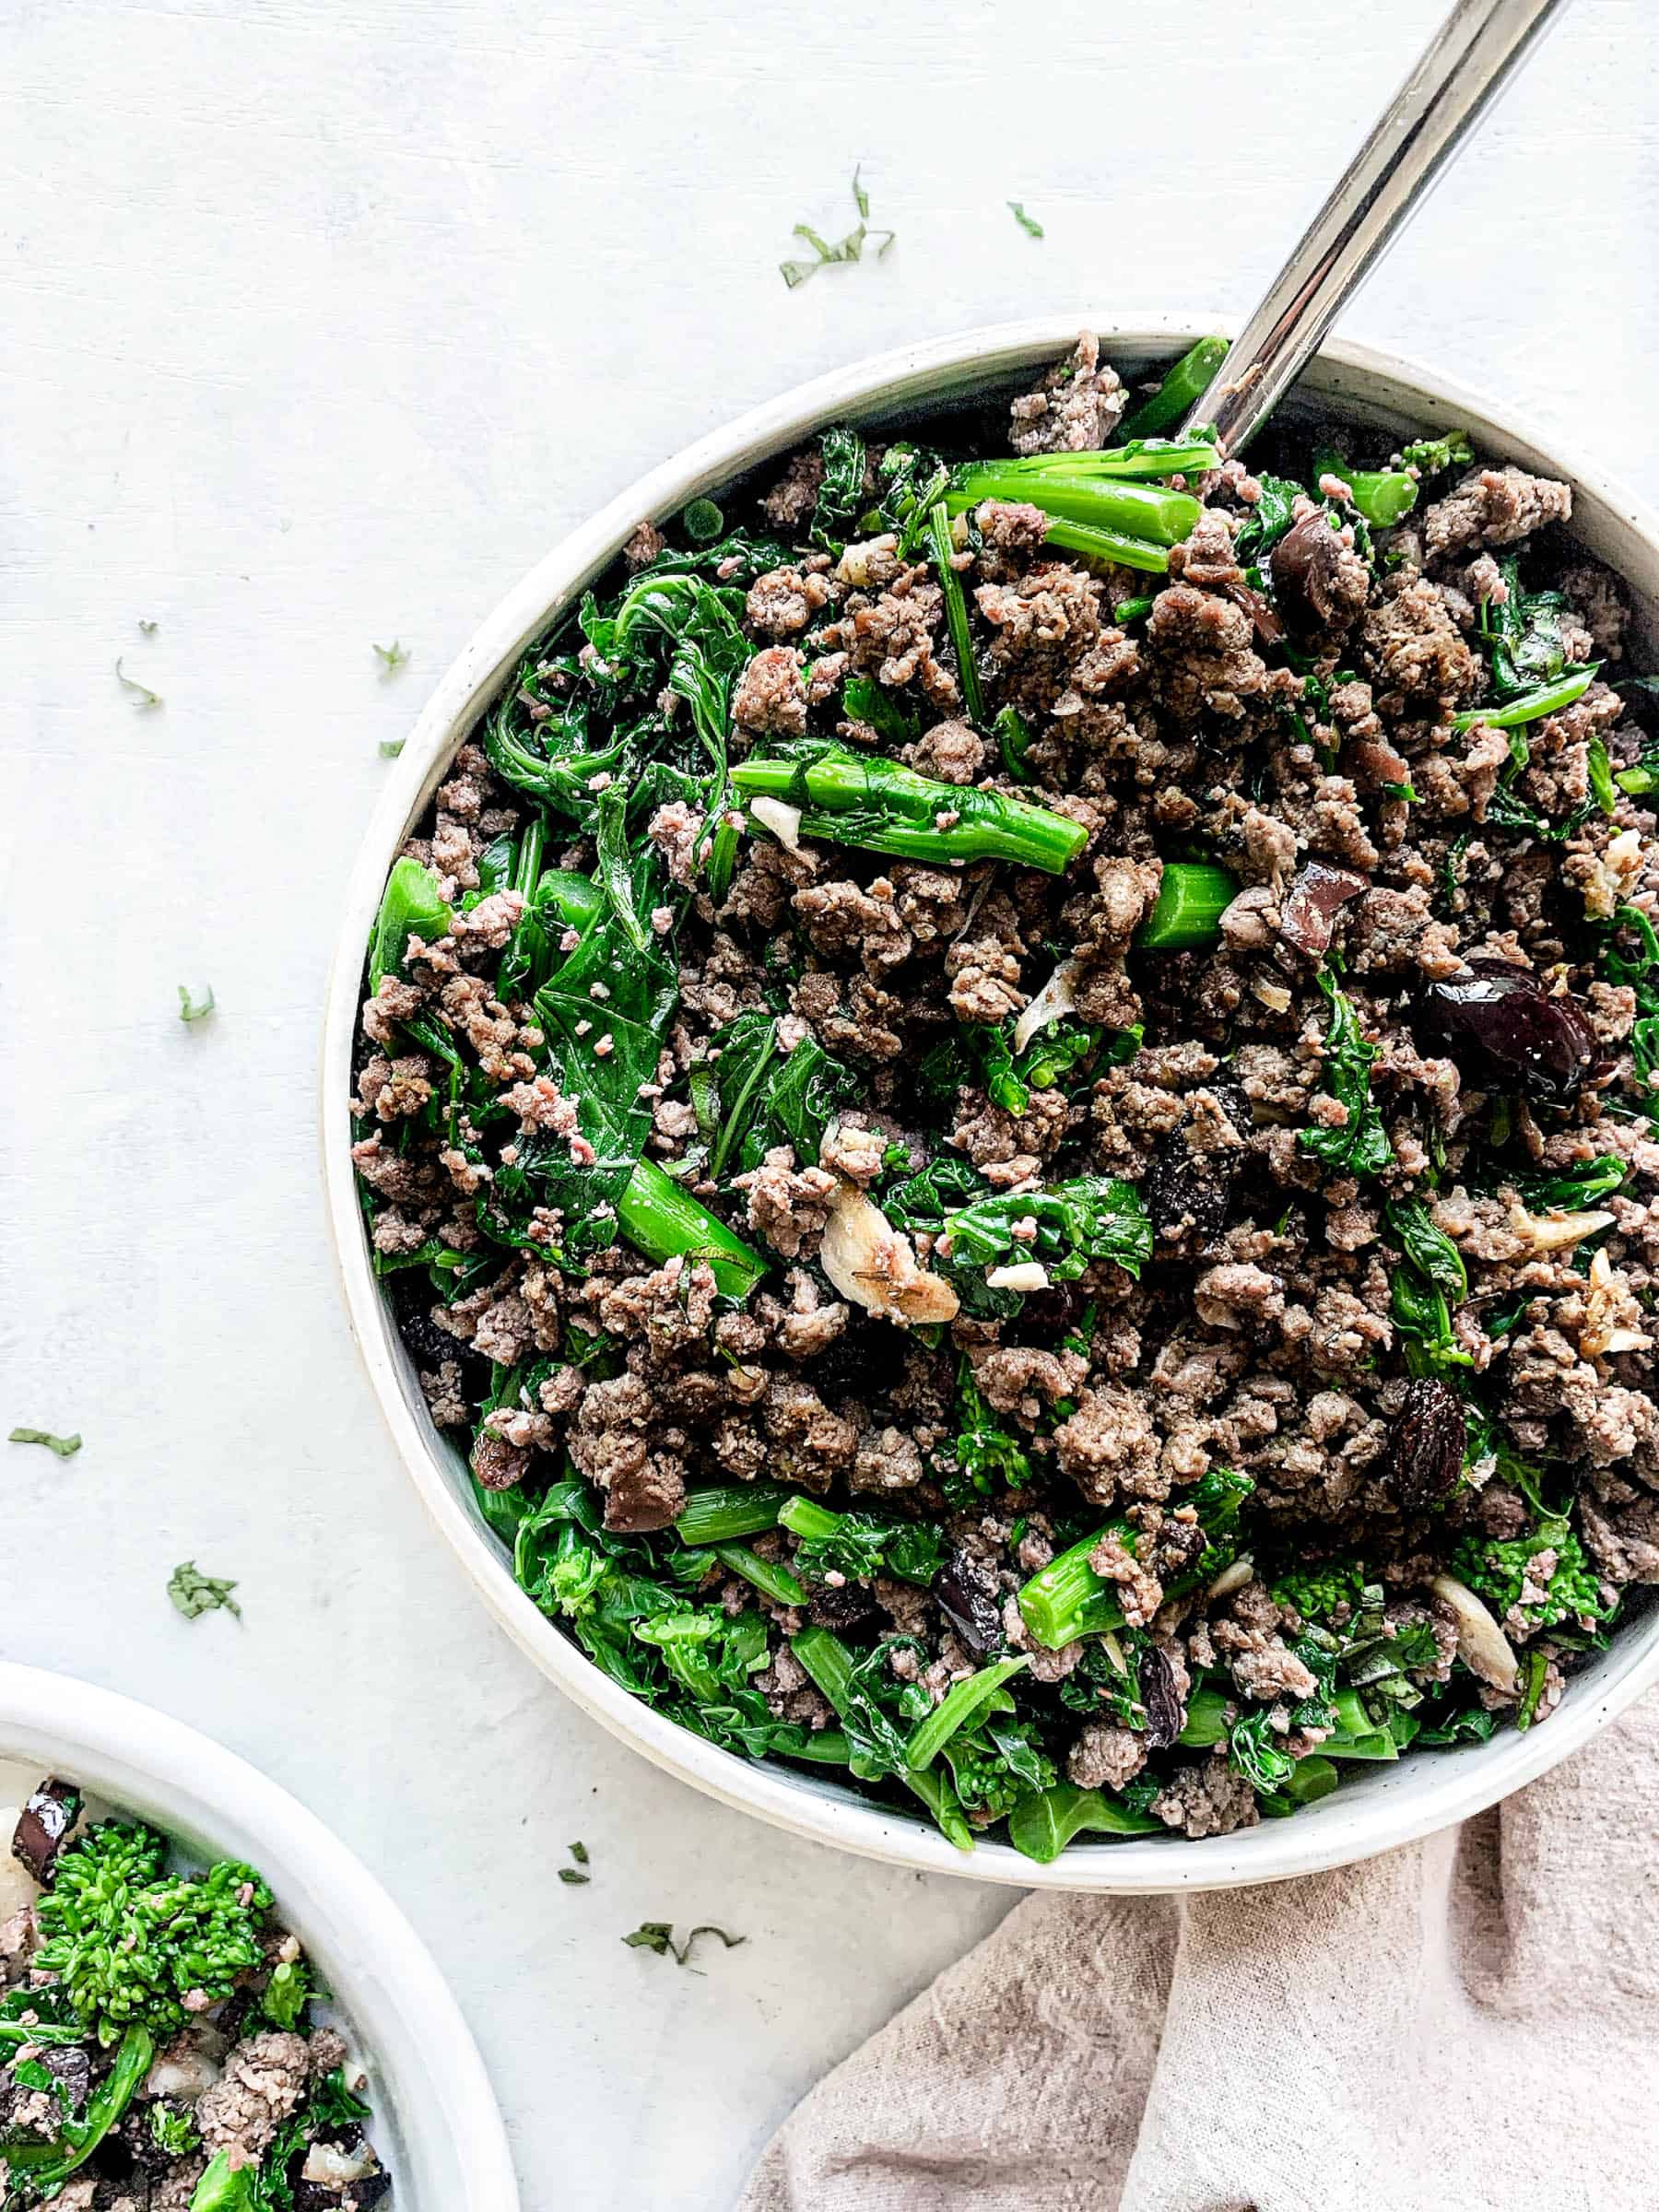 large round dish with ground beef, red olives, raisins and broccoli rabe with a spoon and a beige cloth napkin